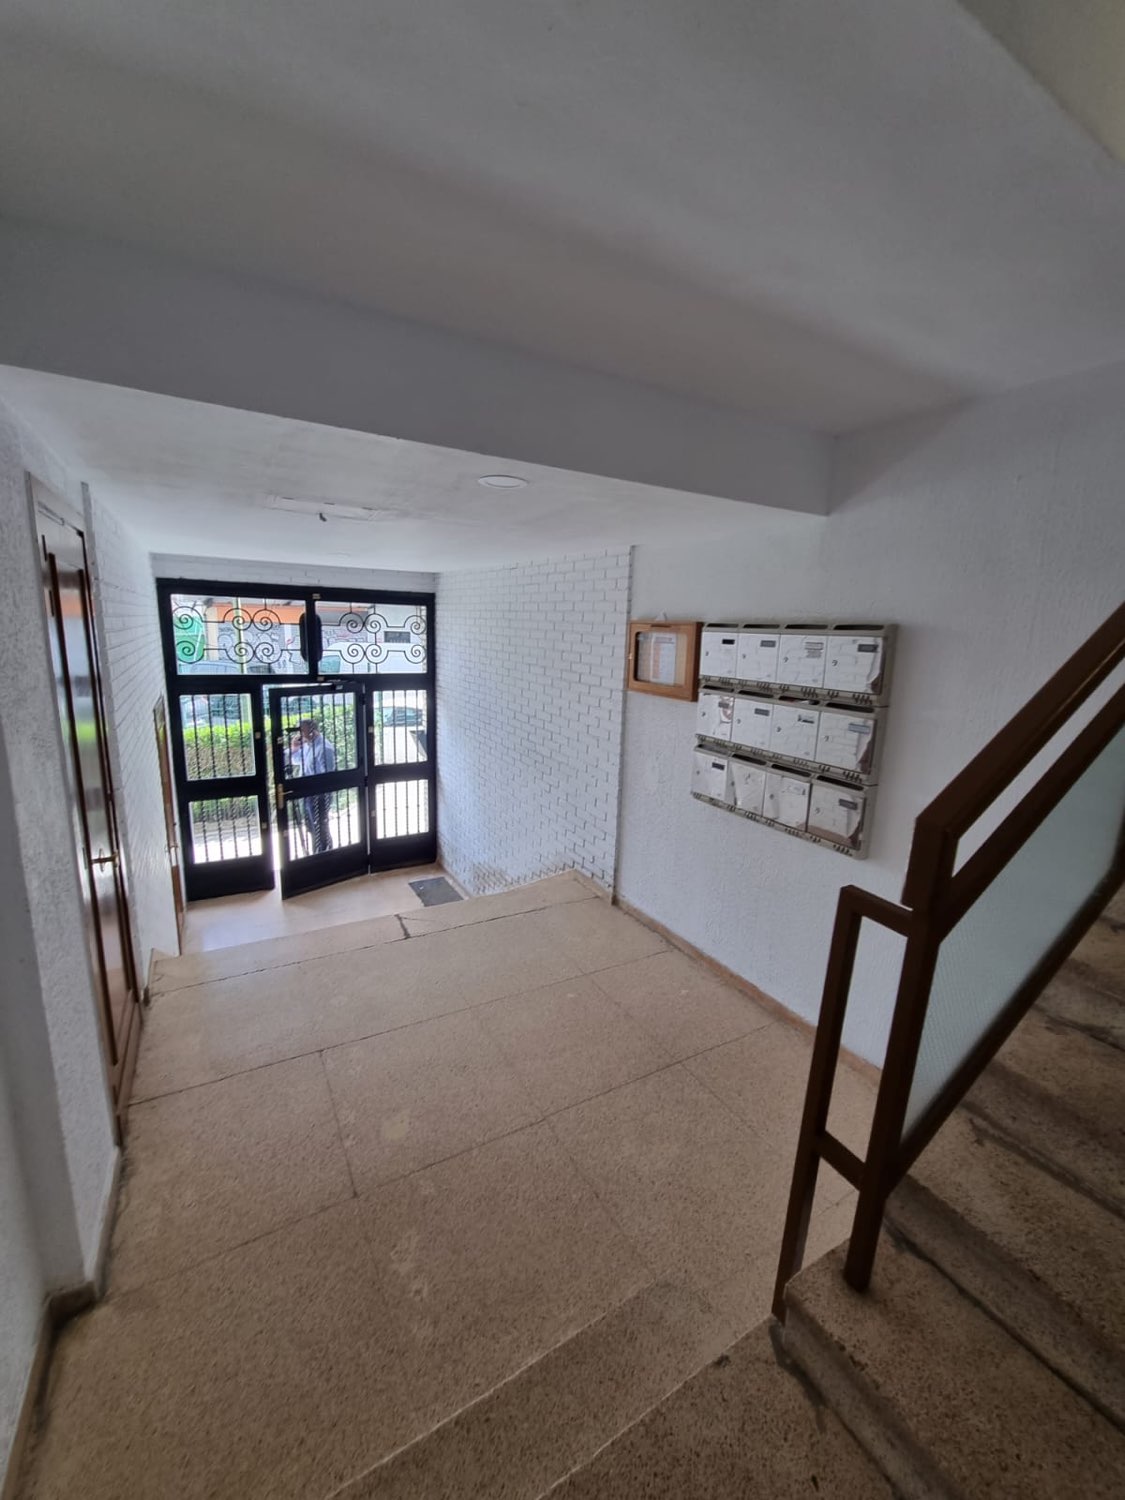 Flat for sale in Móstoles